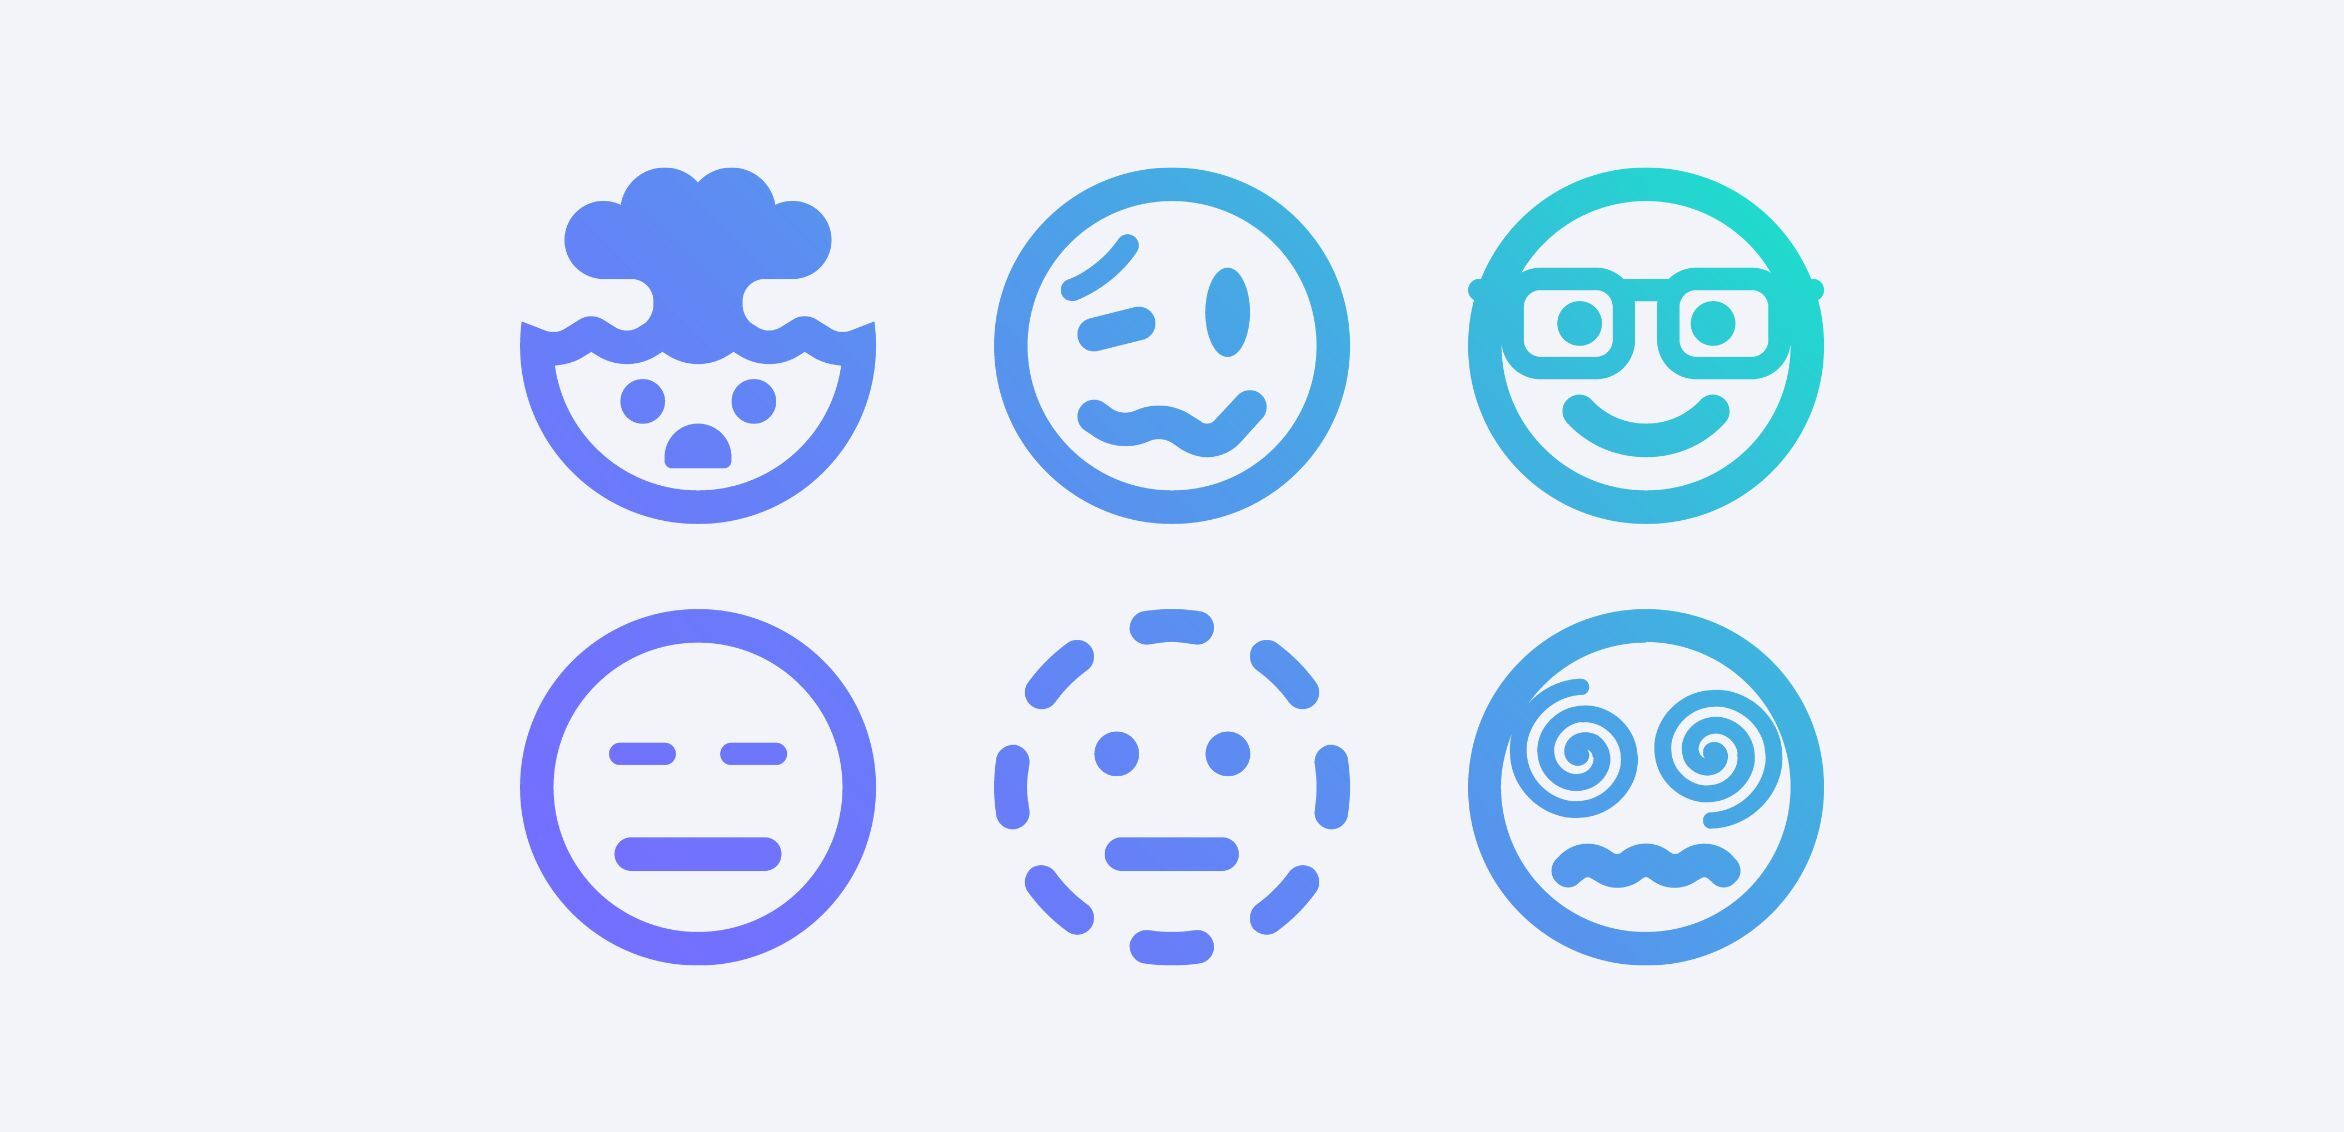 6 face emojis with different expressions